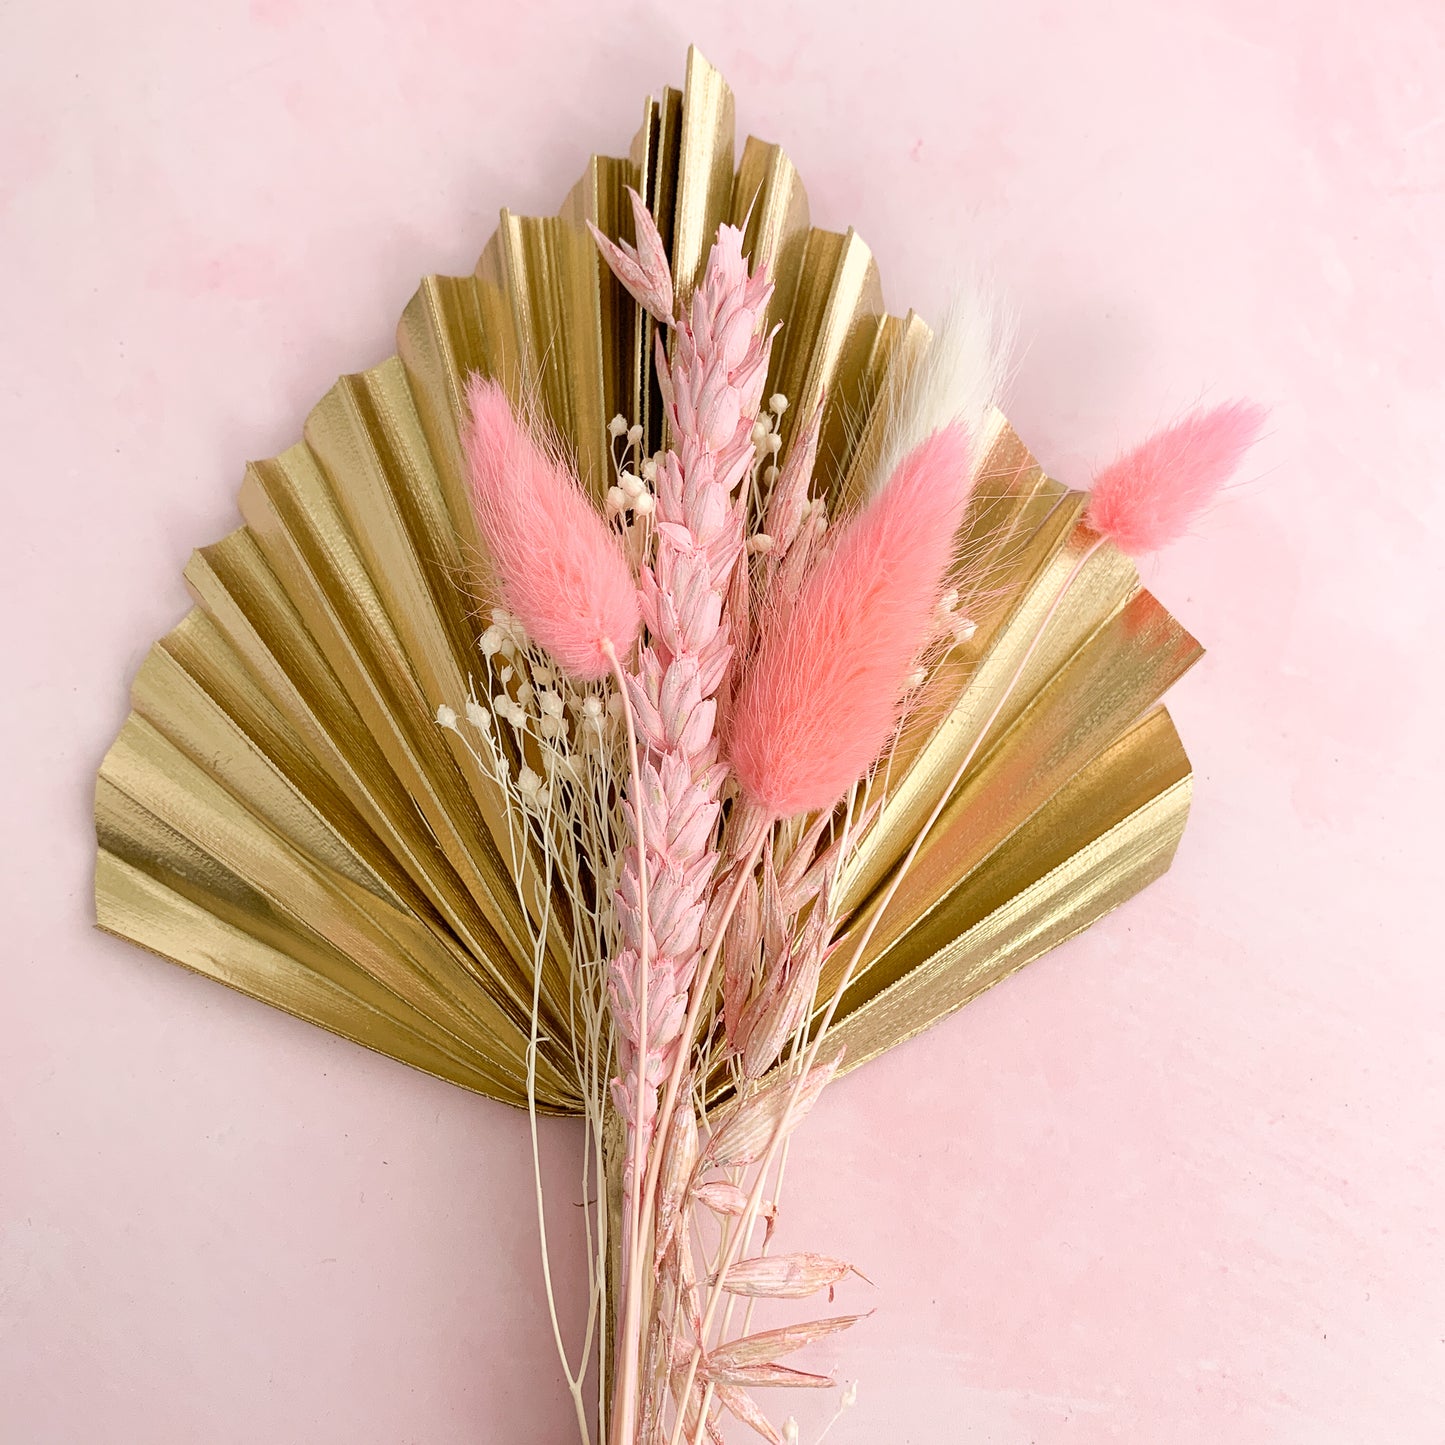 Gold and pink dried palm spear set - not so perfect